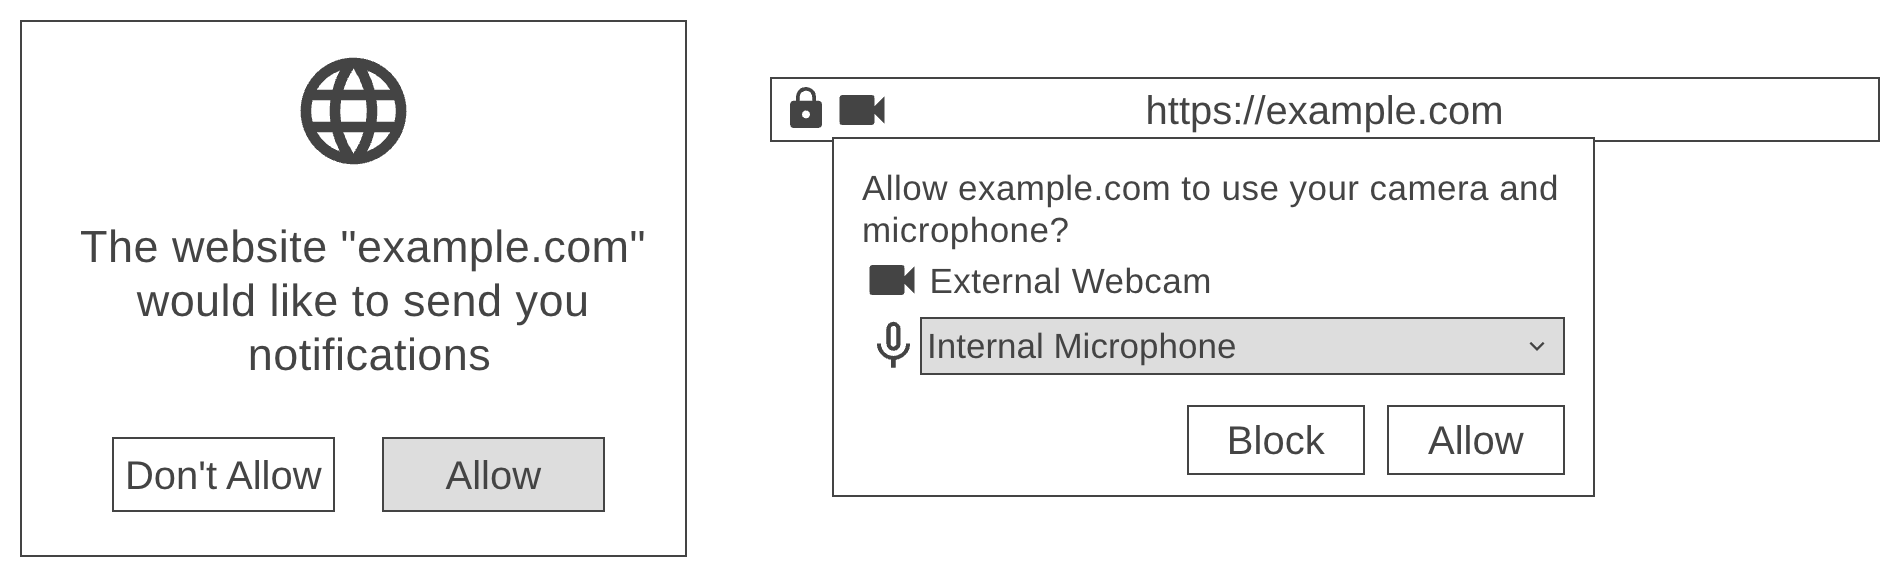 On the left, a mockup of a notifications prompt with an allow and don't allow buttons that states 'the website example.com would like to send you notifications'. On the right, a prompt near the URL bar asking to give permission to the camera and microphone to the example site.